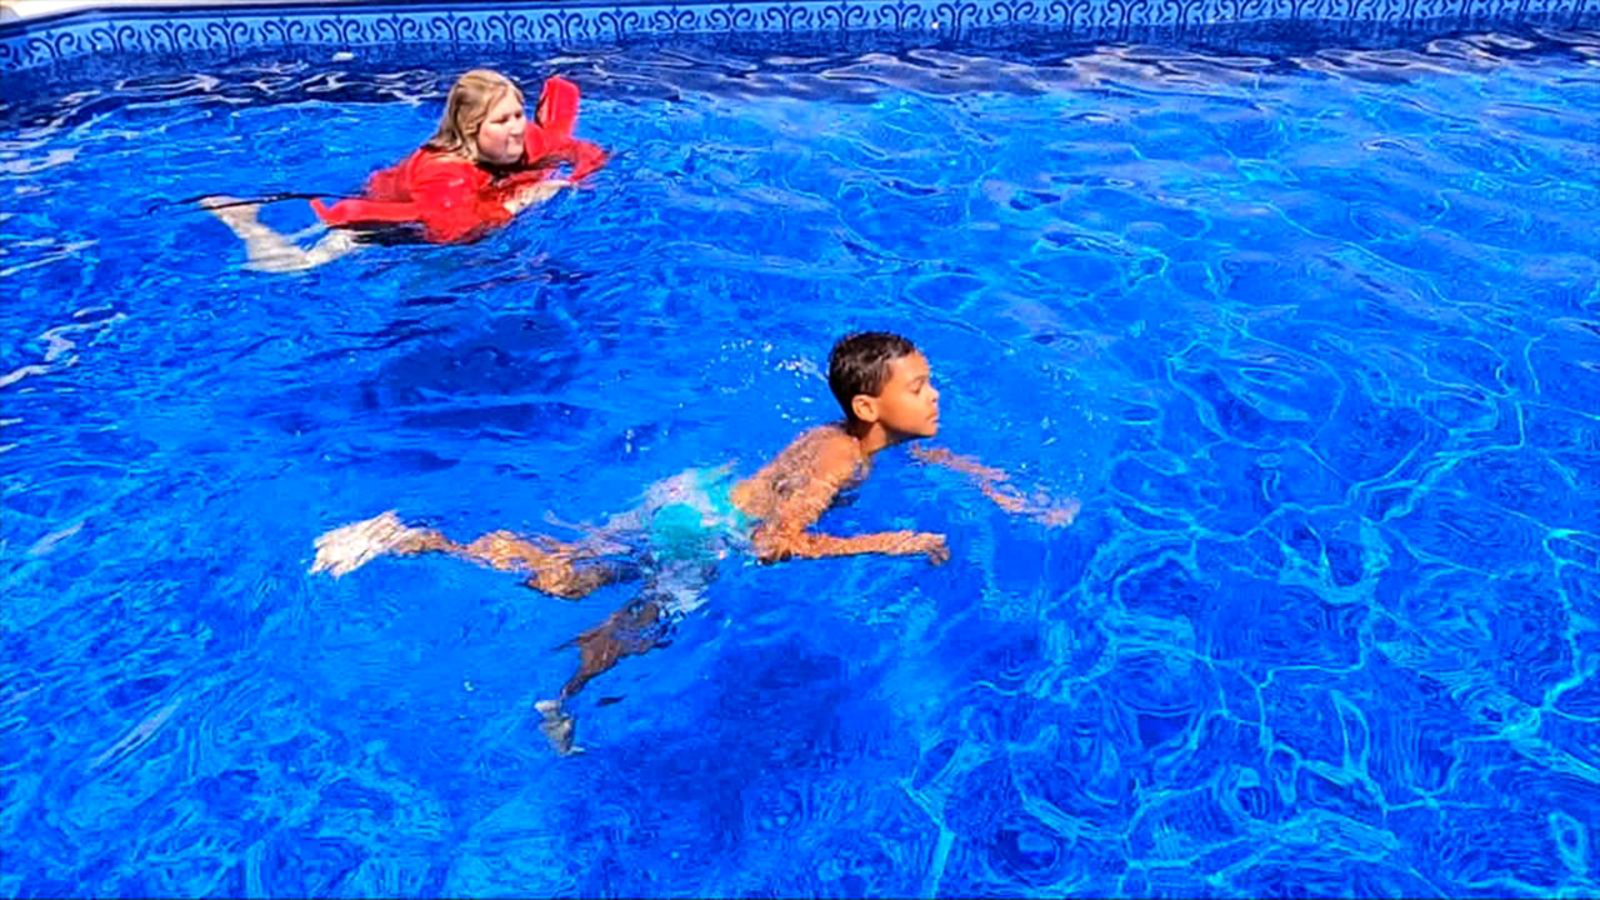 Water safety: Pediatrician shares mistakes to avoid amid rise in drownings [Video]